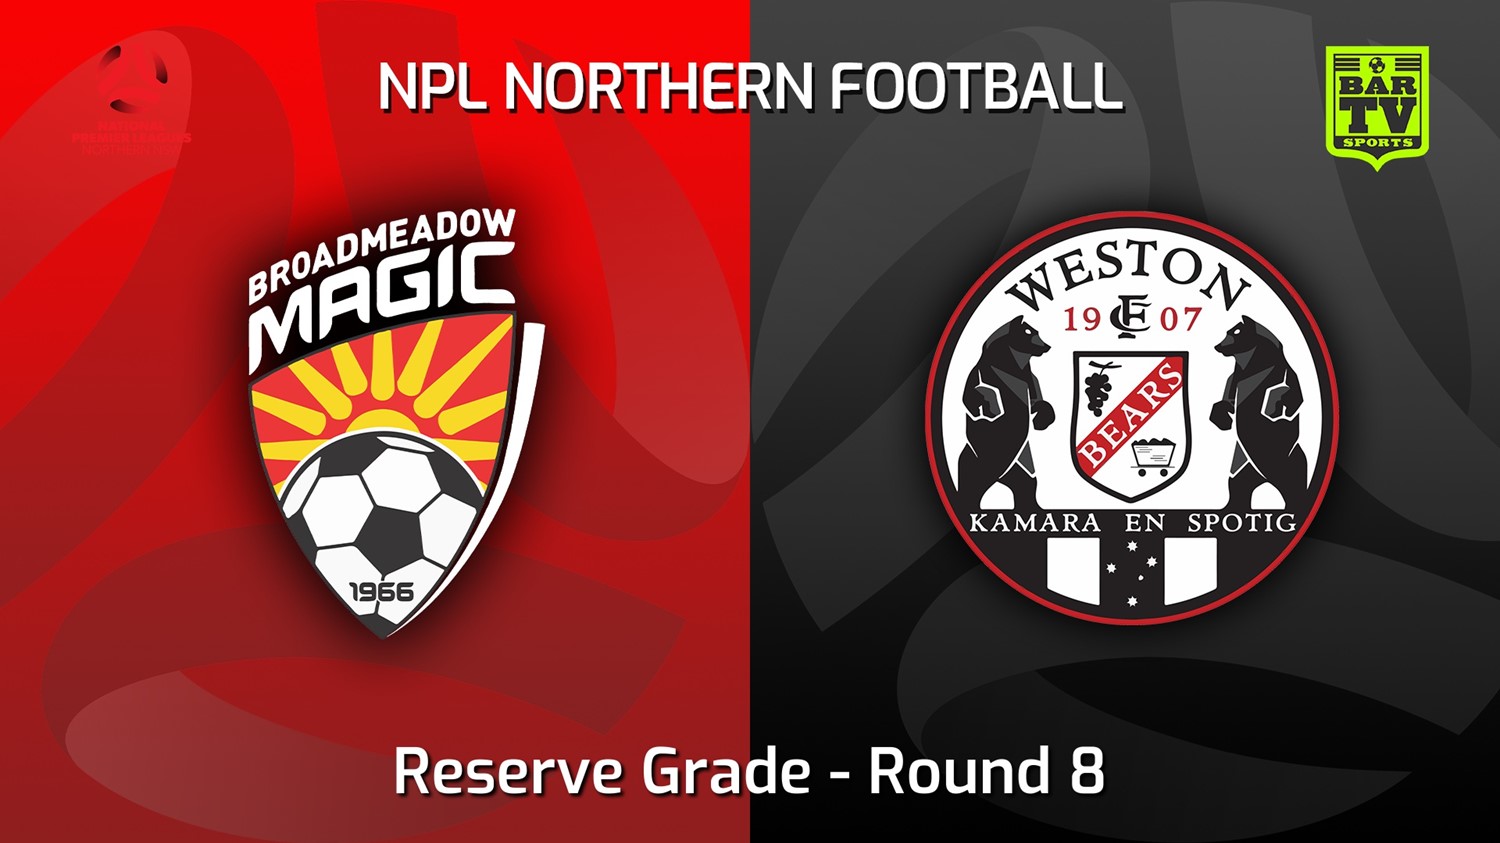 220429-NNSW NPLM Res Round 8 - Broadmeadow Magic Res v Weston Workers FC Res Minigame Slate Image